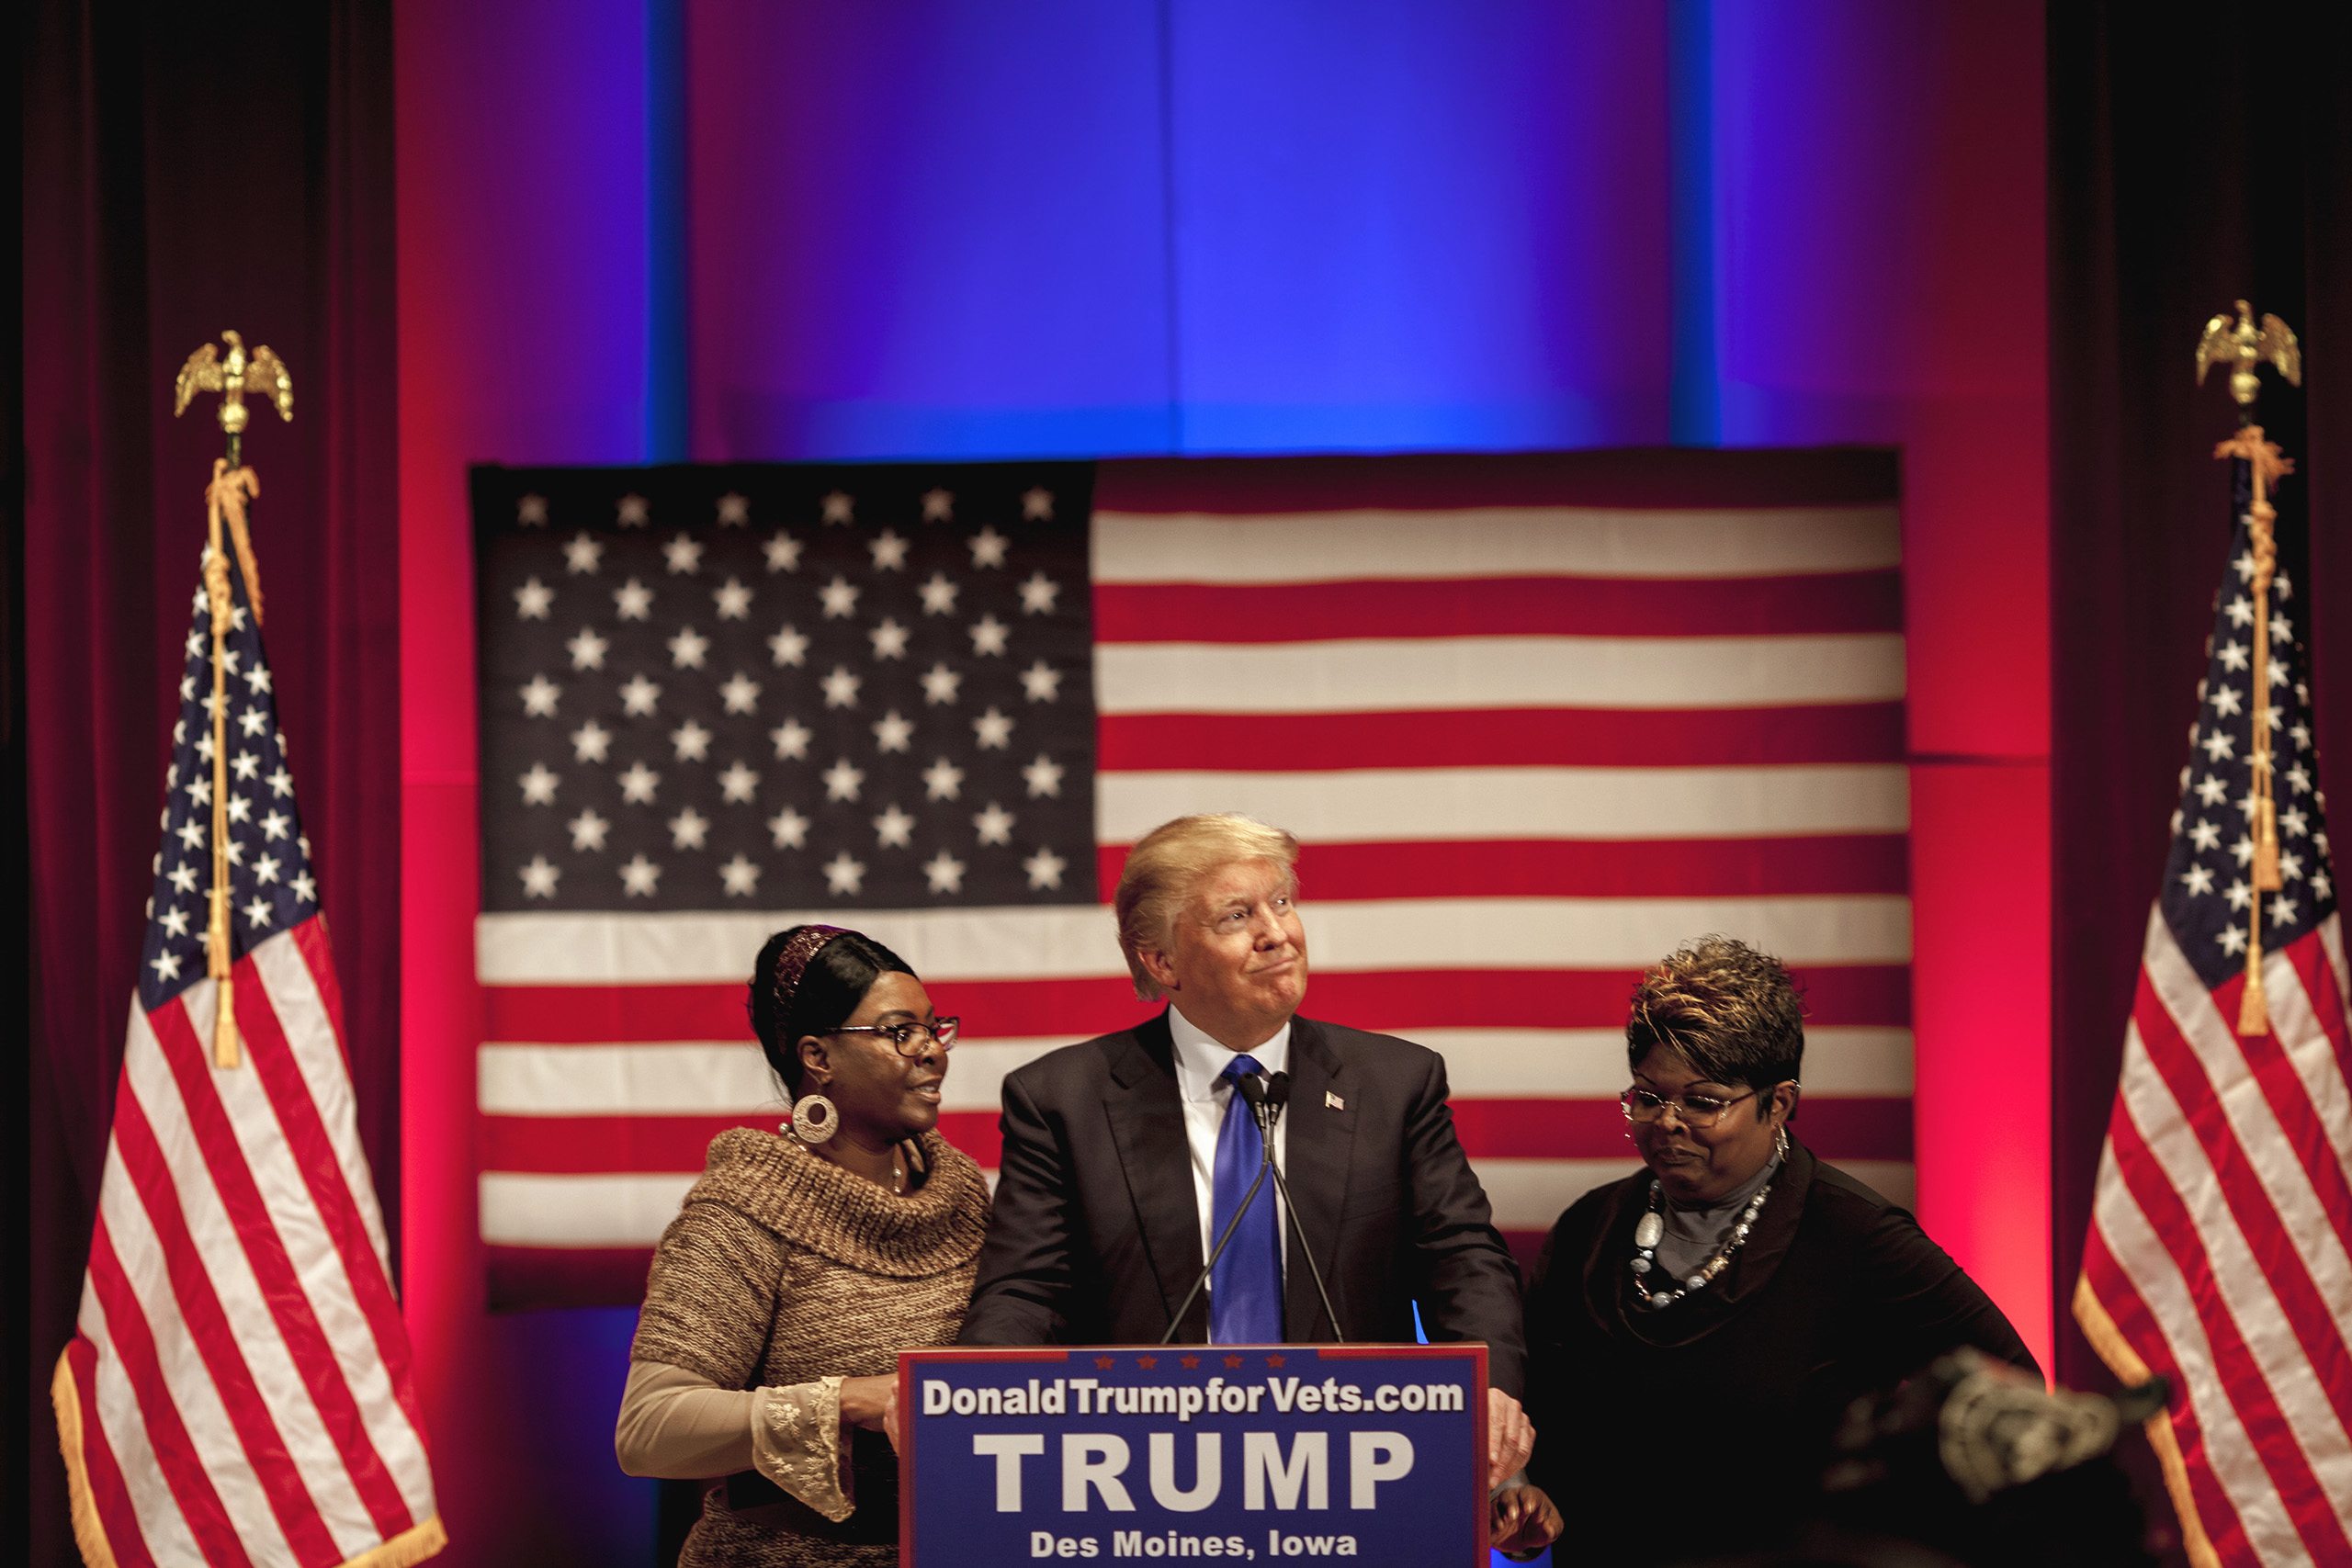 Donald Trump appears with supporters Diamond and Silk at benefit and rally for Wounded Warriors, a charity organization for Veterans,  at Drake University in Des Moines, Iowa, on Thursday, Jan. 28, 2016. The event was timed to coincide with the Republican debates on Fox which he declined to attend. (Natalie Keyssar for TIME)